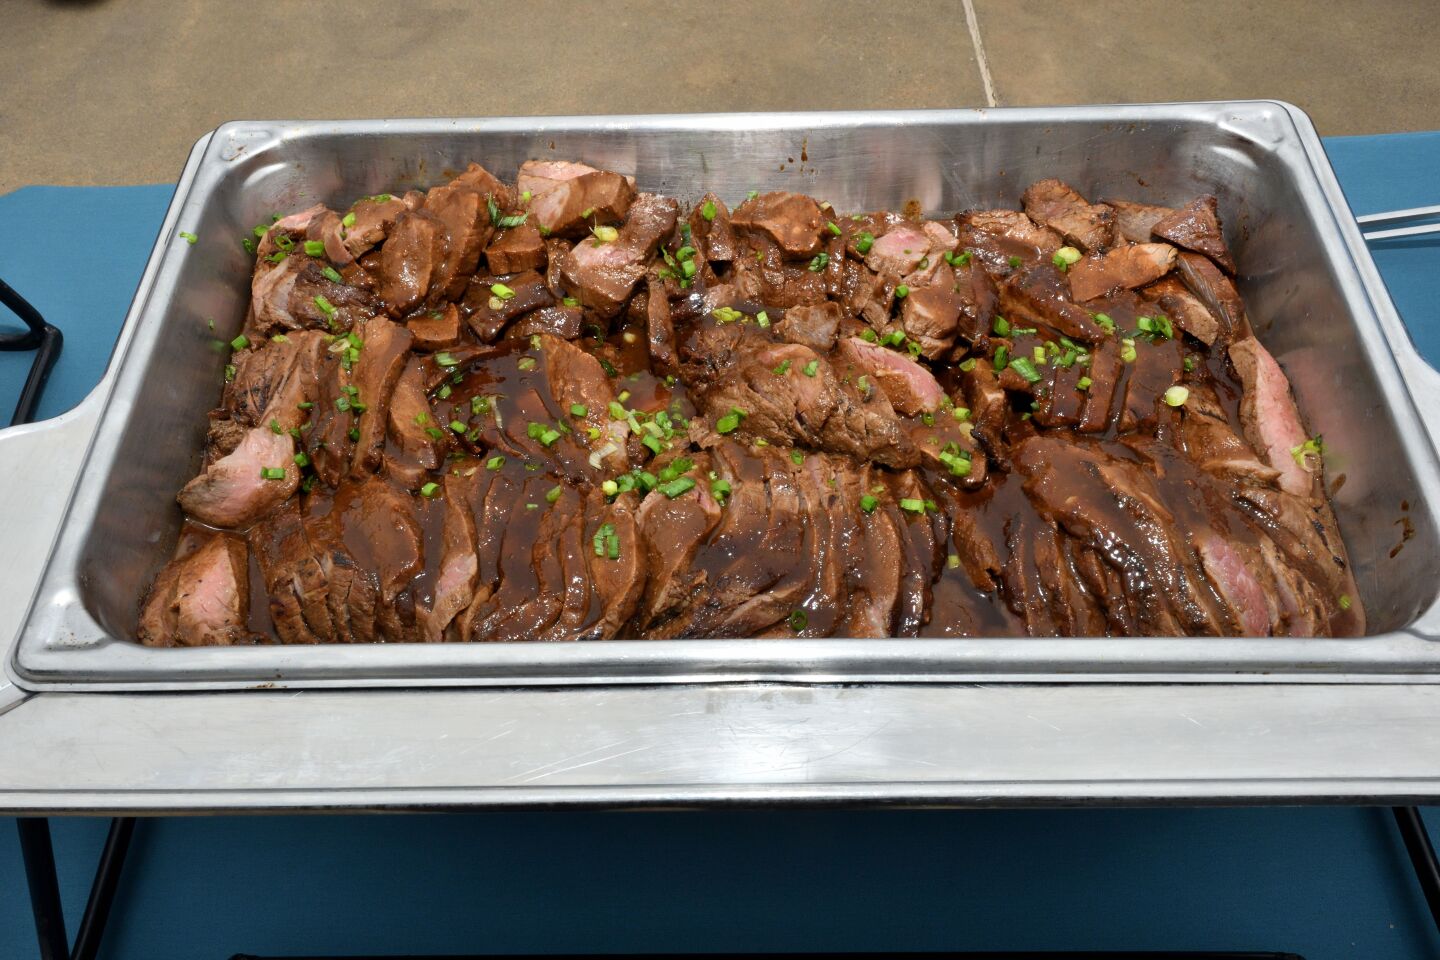 Hawaiian-style marinated beef was ready for luau guests to dig in.